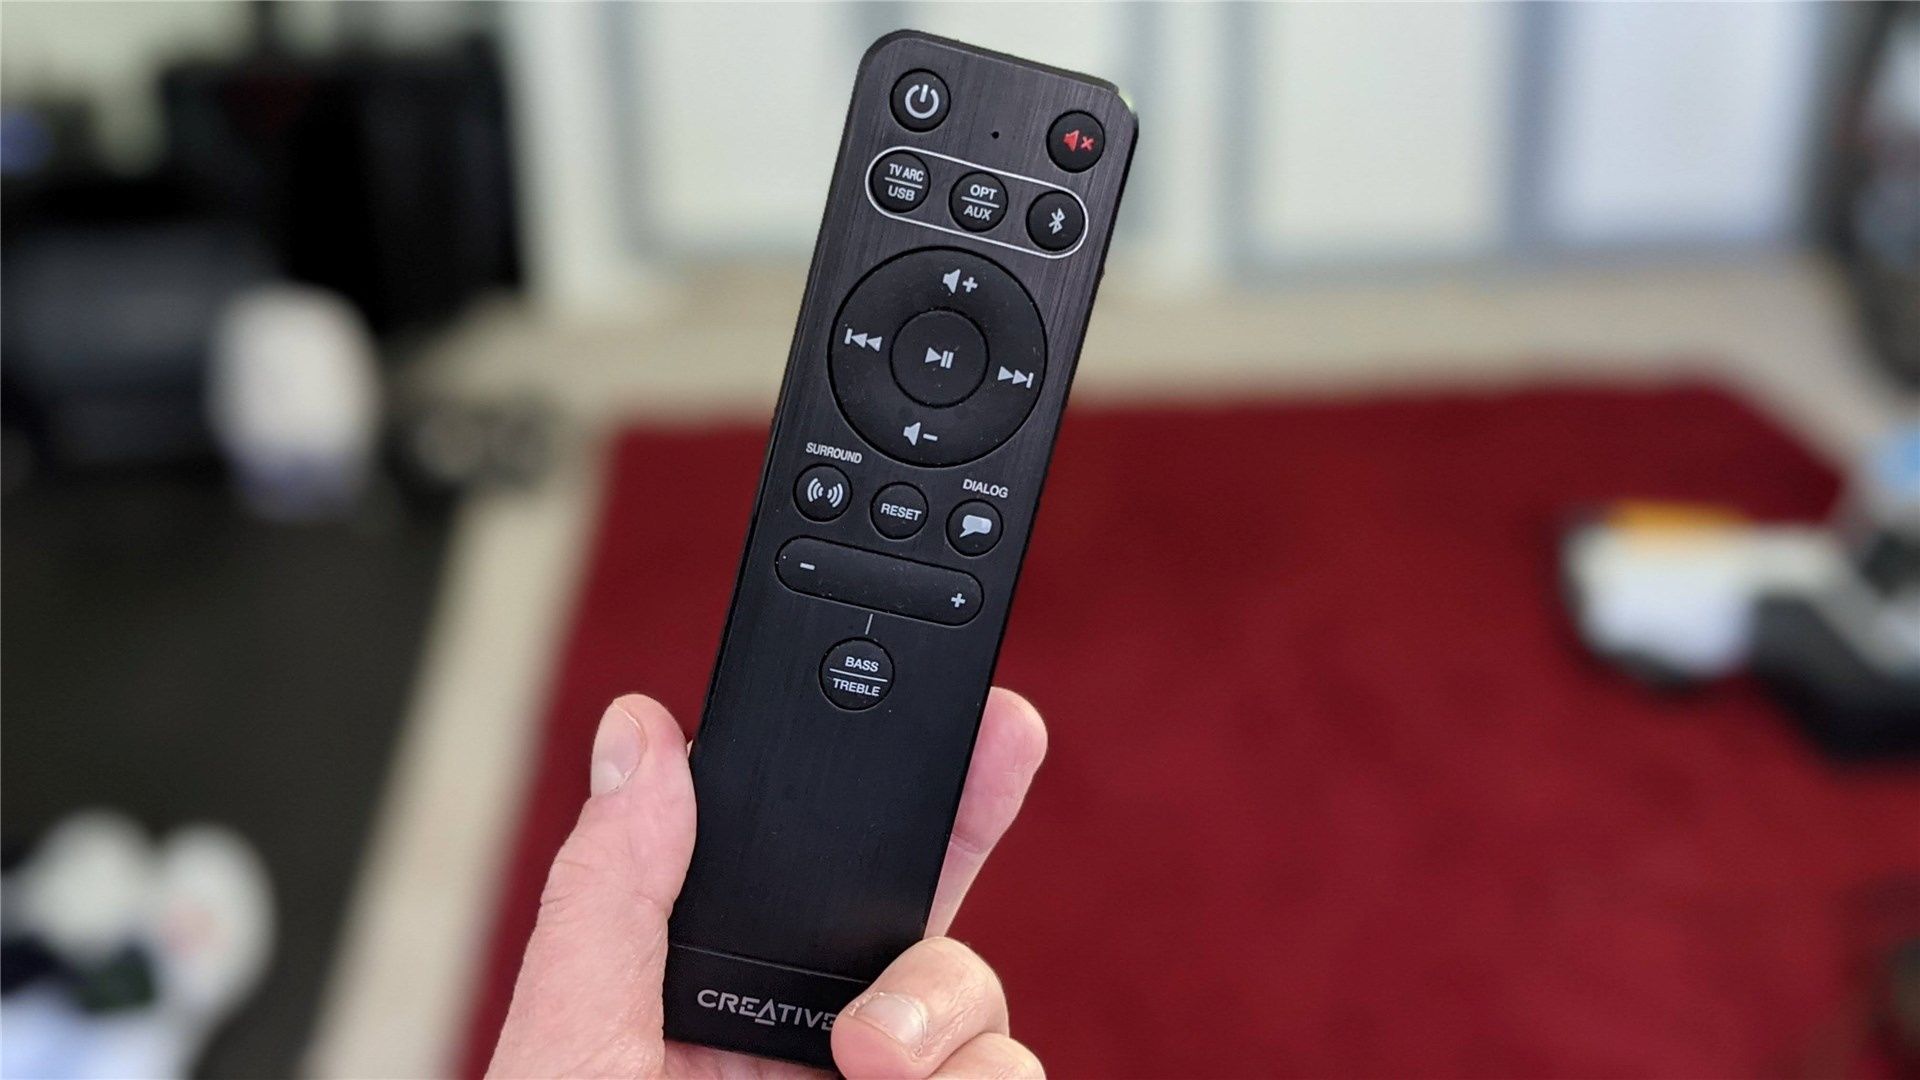 The Stage V2's remote control